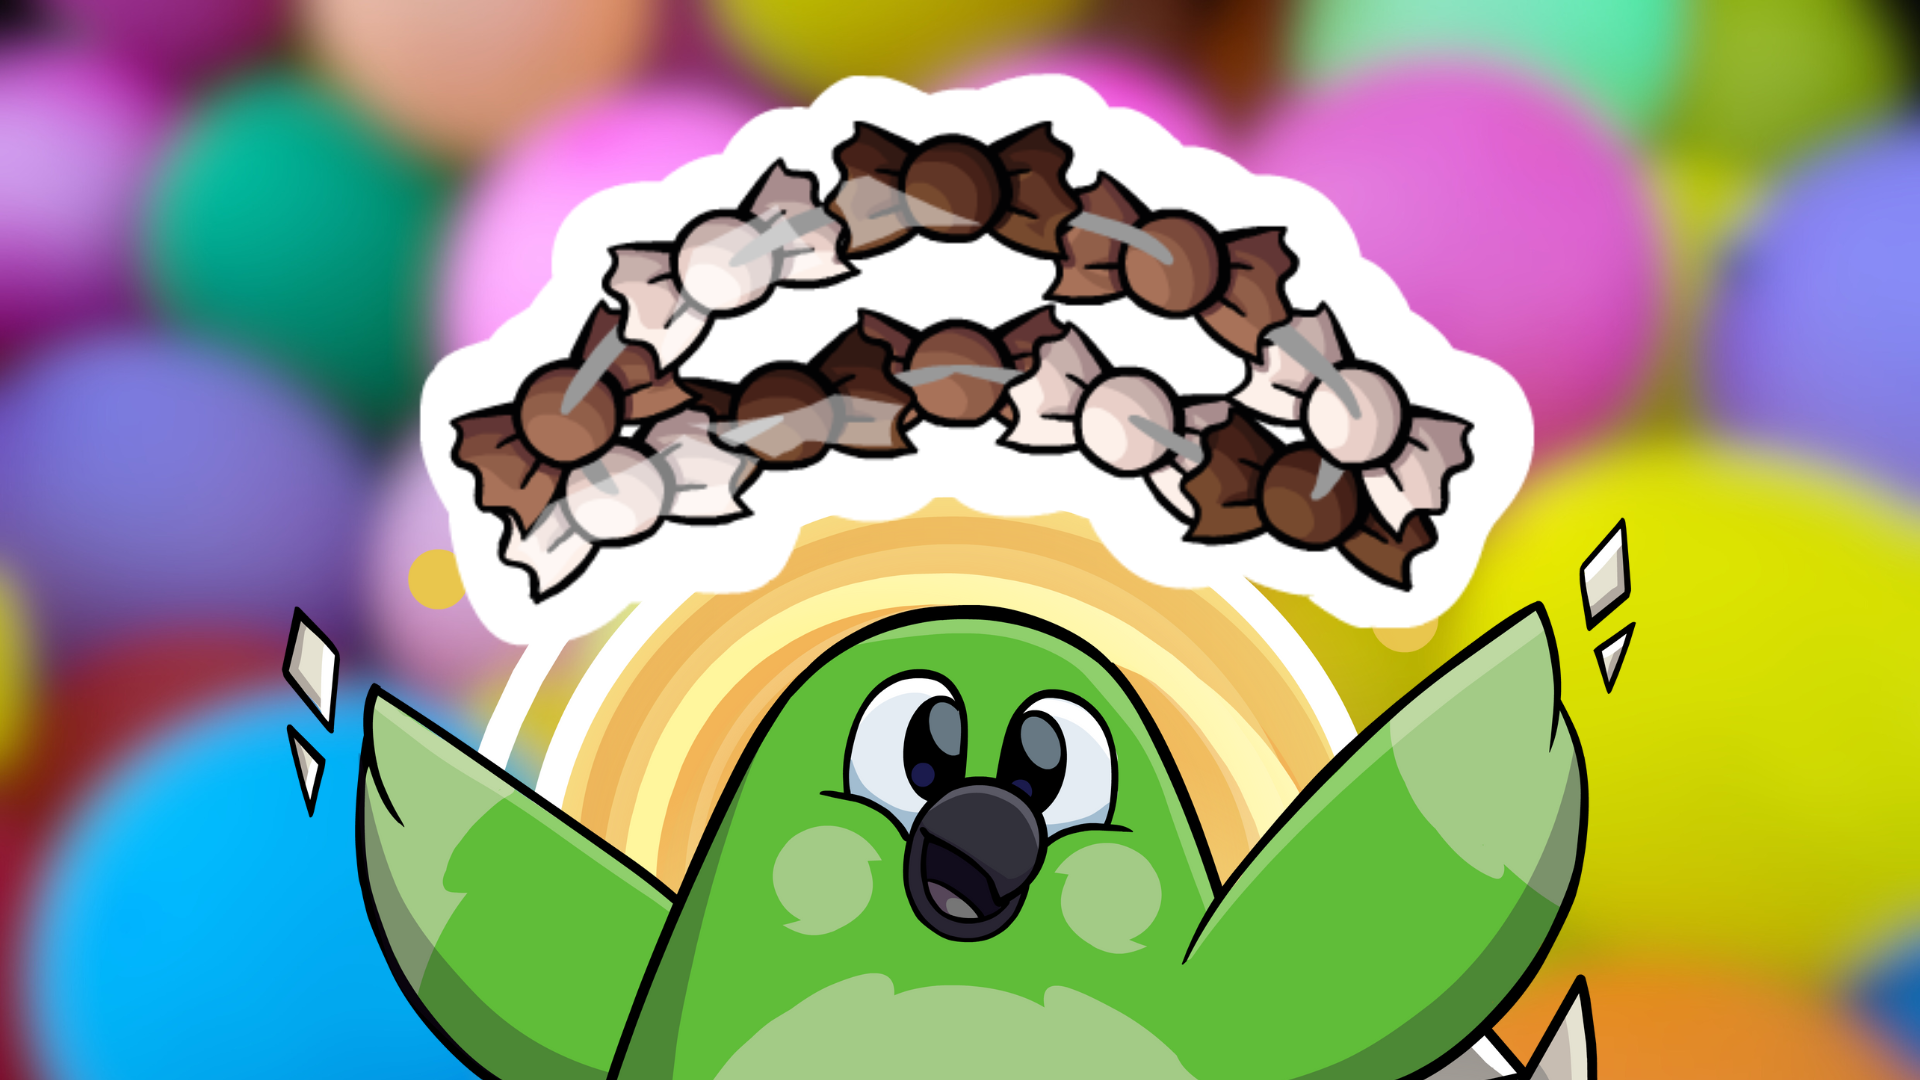 A green parrot with wide open arms looking above at rows of brown chocolate candy. The background is an assortment of colorful balloons. This introduces our outdoor birthday party games for kids.